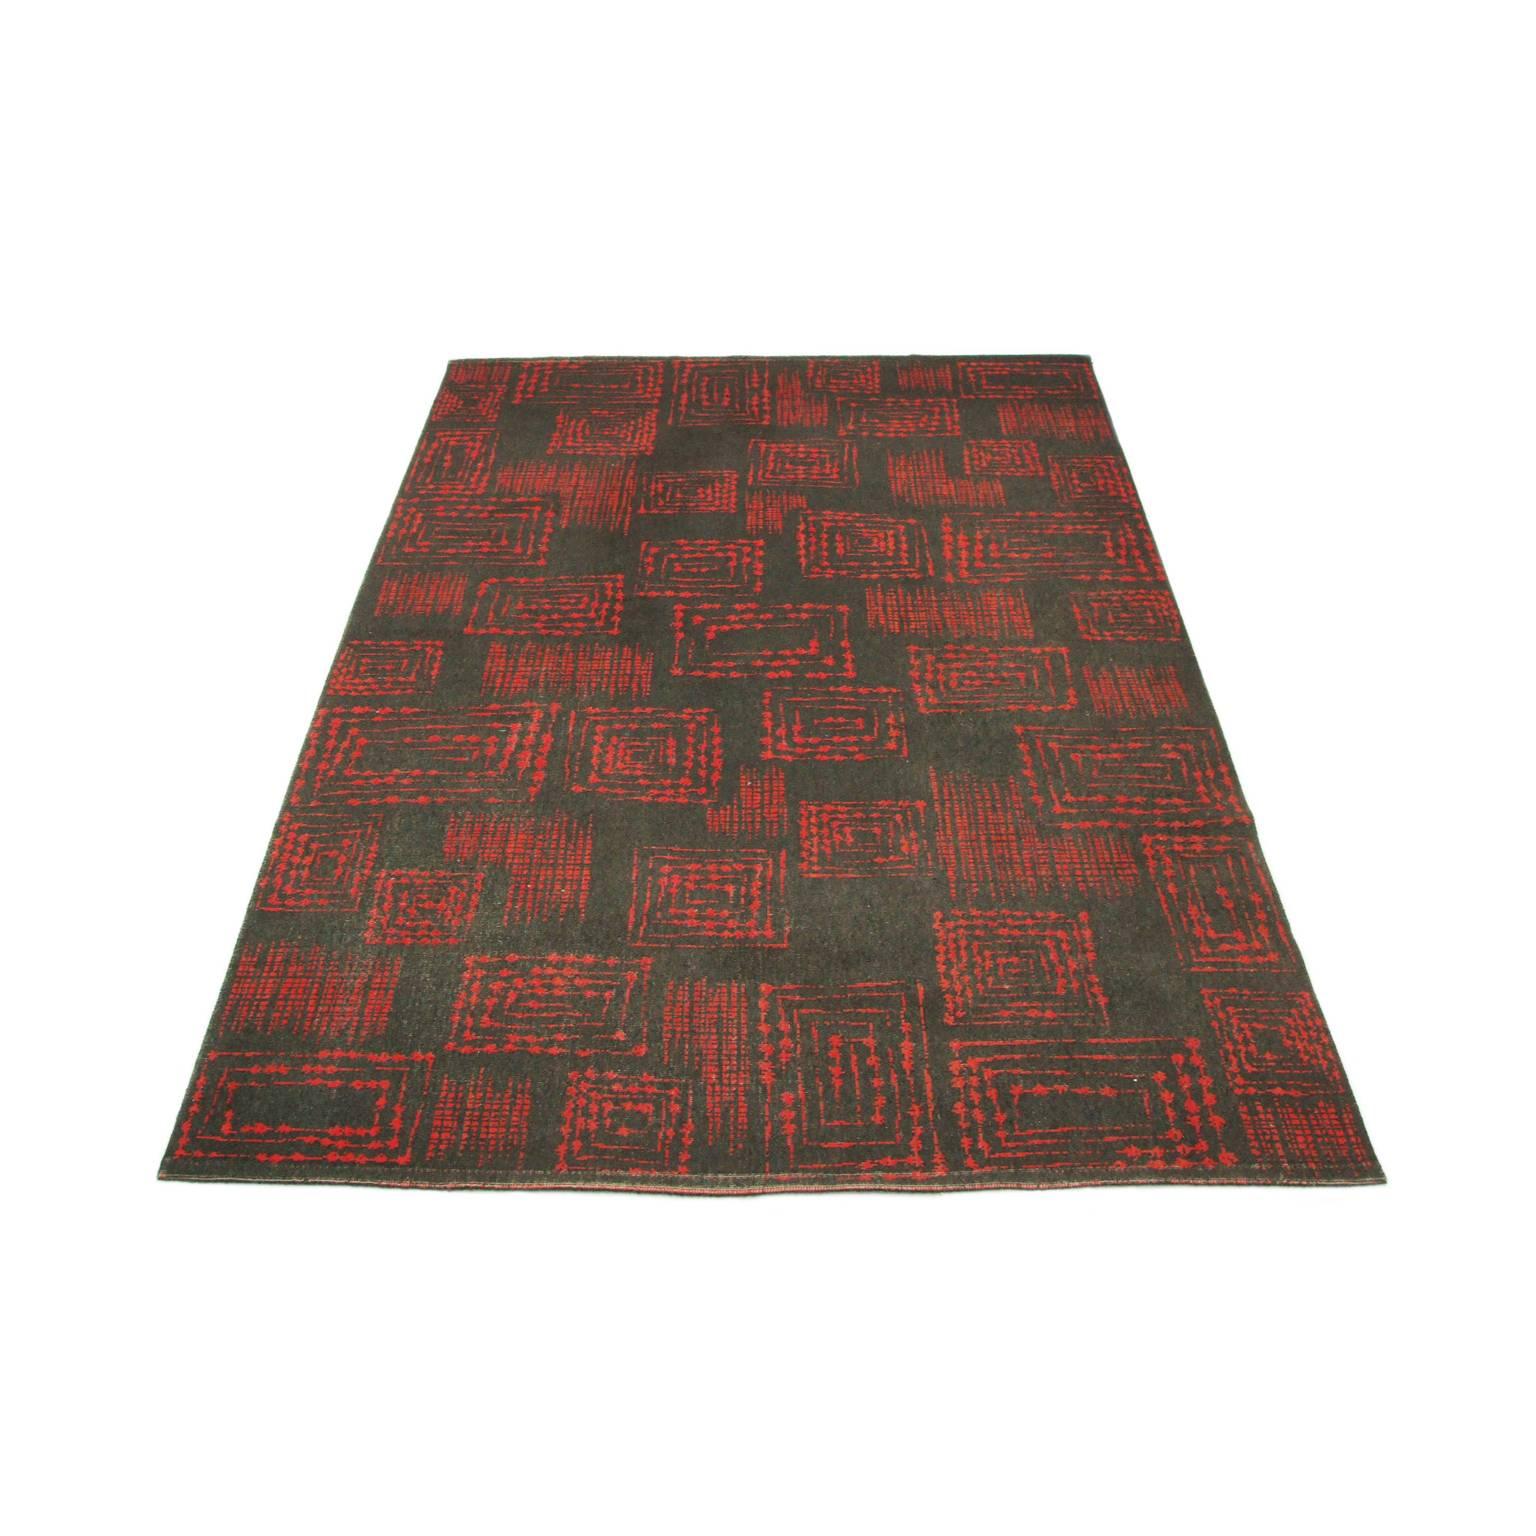 1950s rug designed and manufactured in Germany.

Red and grey geometric design.

Measures: L 300 cm x W 200 cm.